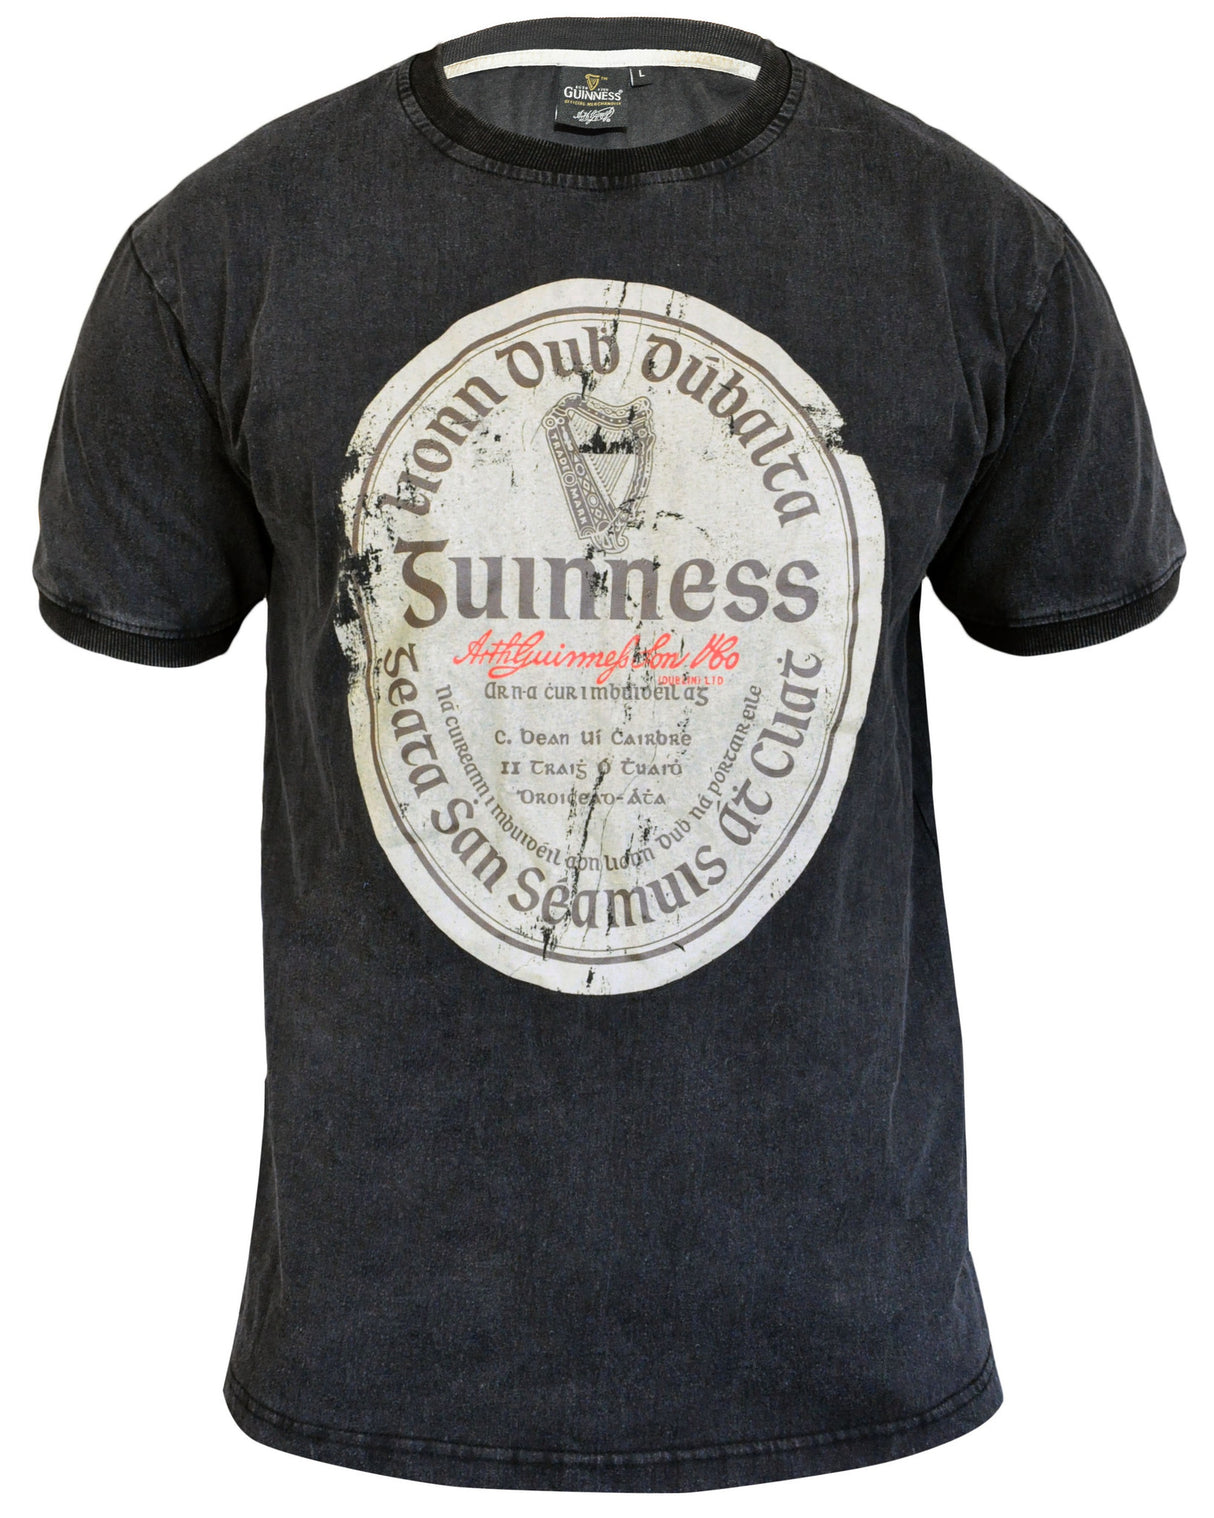 Black Distressed Gaelic Label Tee from Guinness